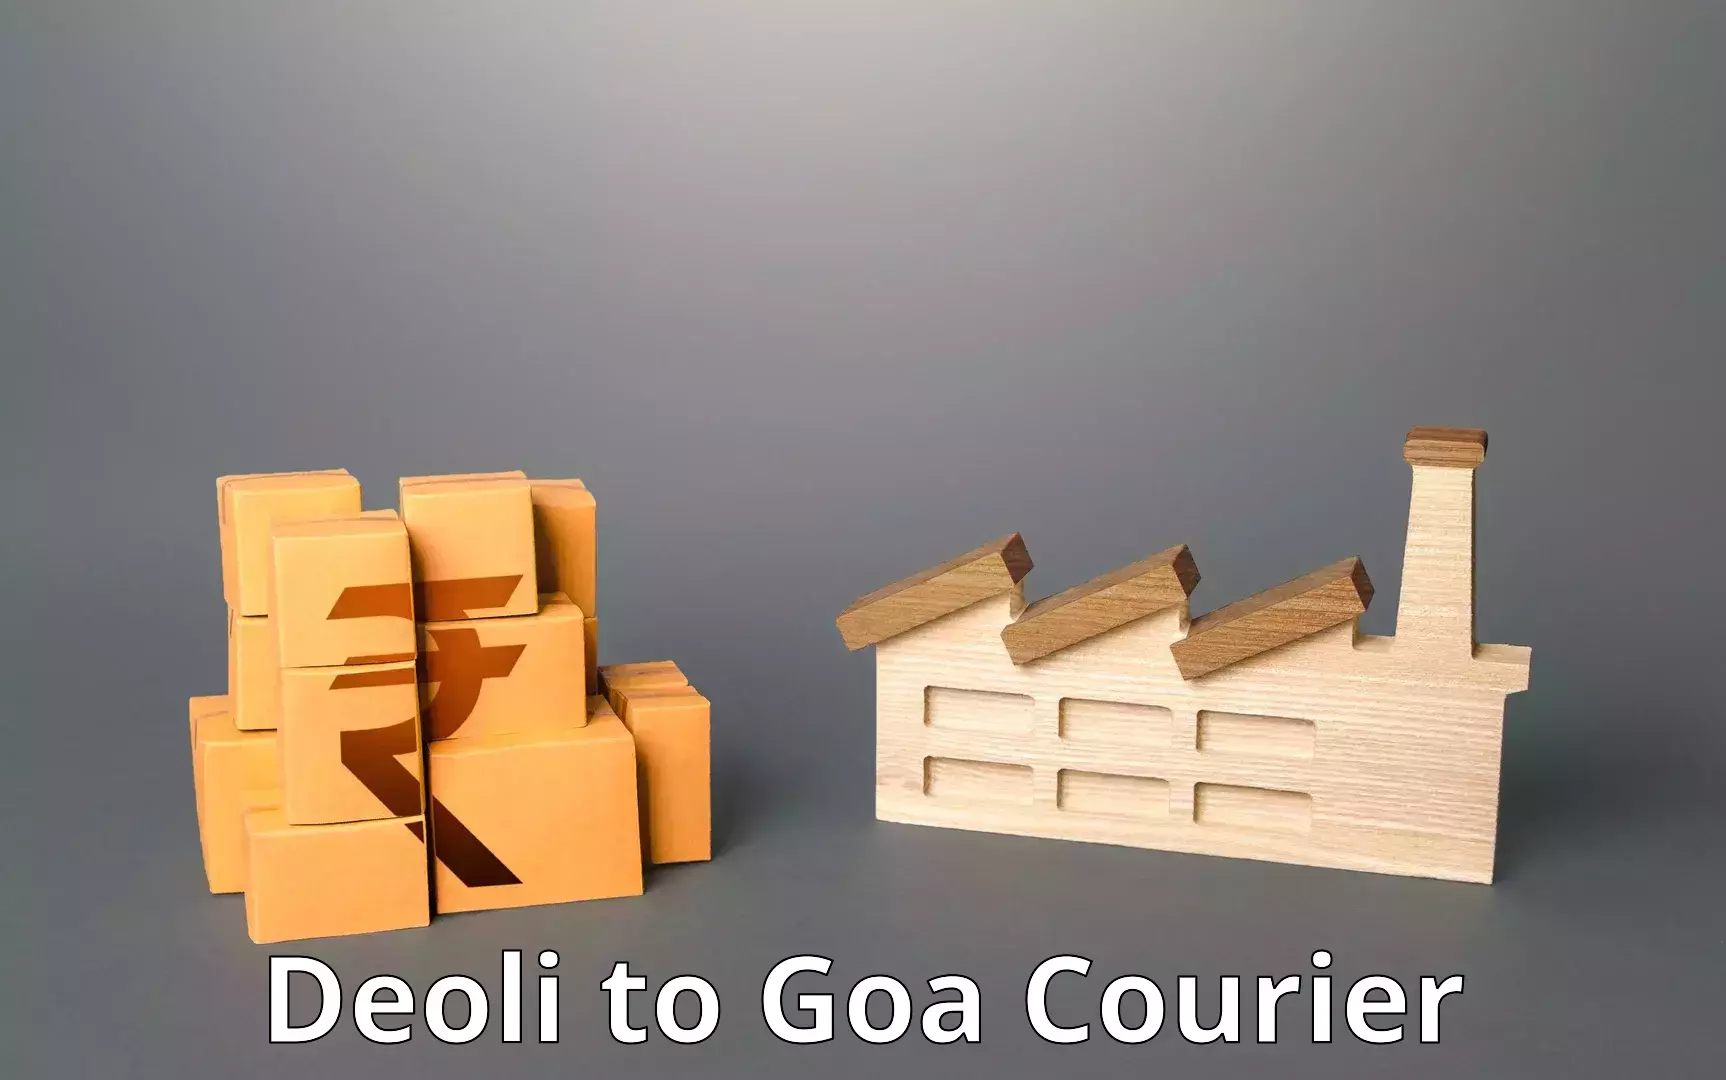 State-of-the-art courier technology Deoli to Panaji